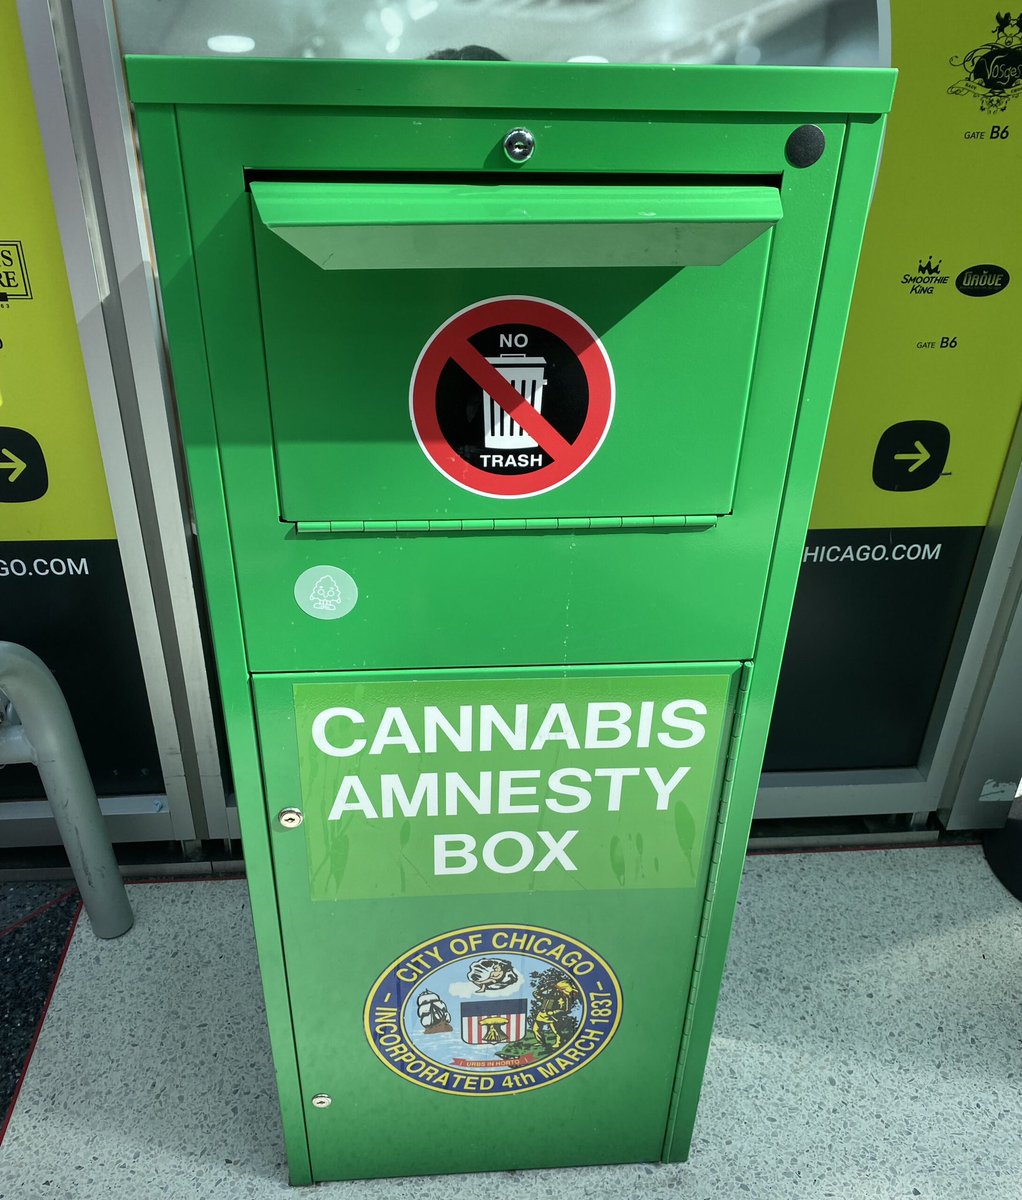 everyone always talks about drinking the forbidden TSA liquid disposal bin jungle juice, but the real challenge is smoking the forbidden o’hare cannabis amnesty box weed smorgasbord